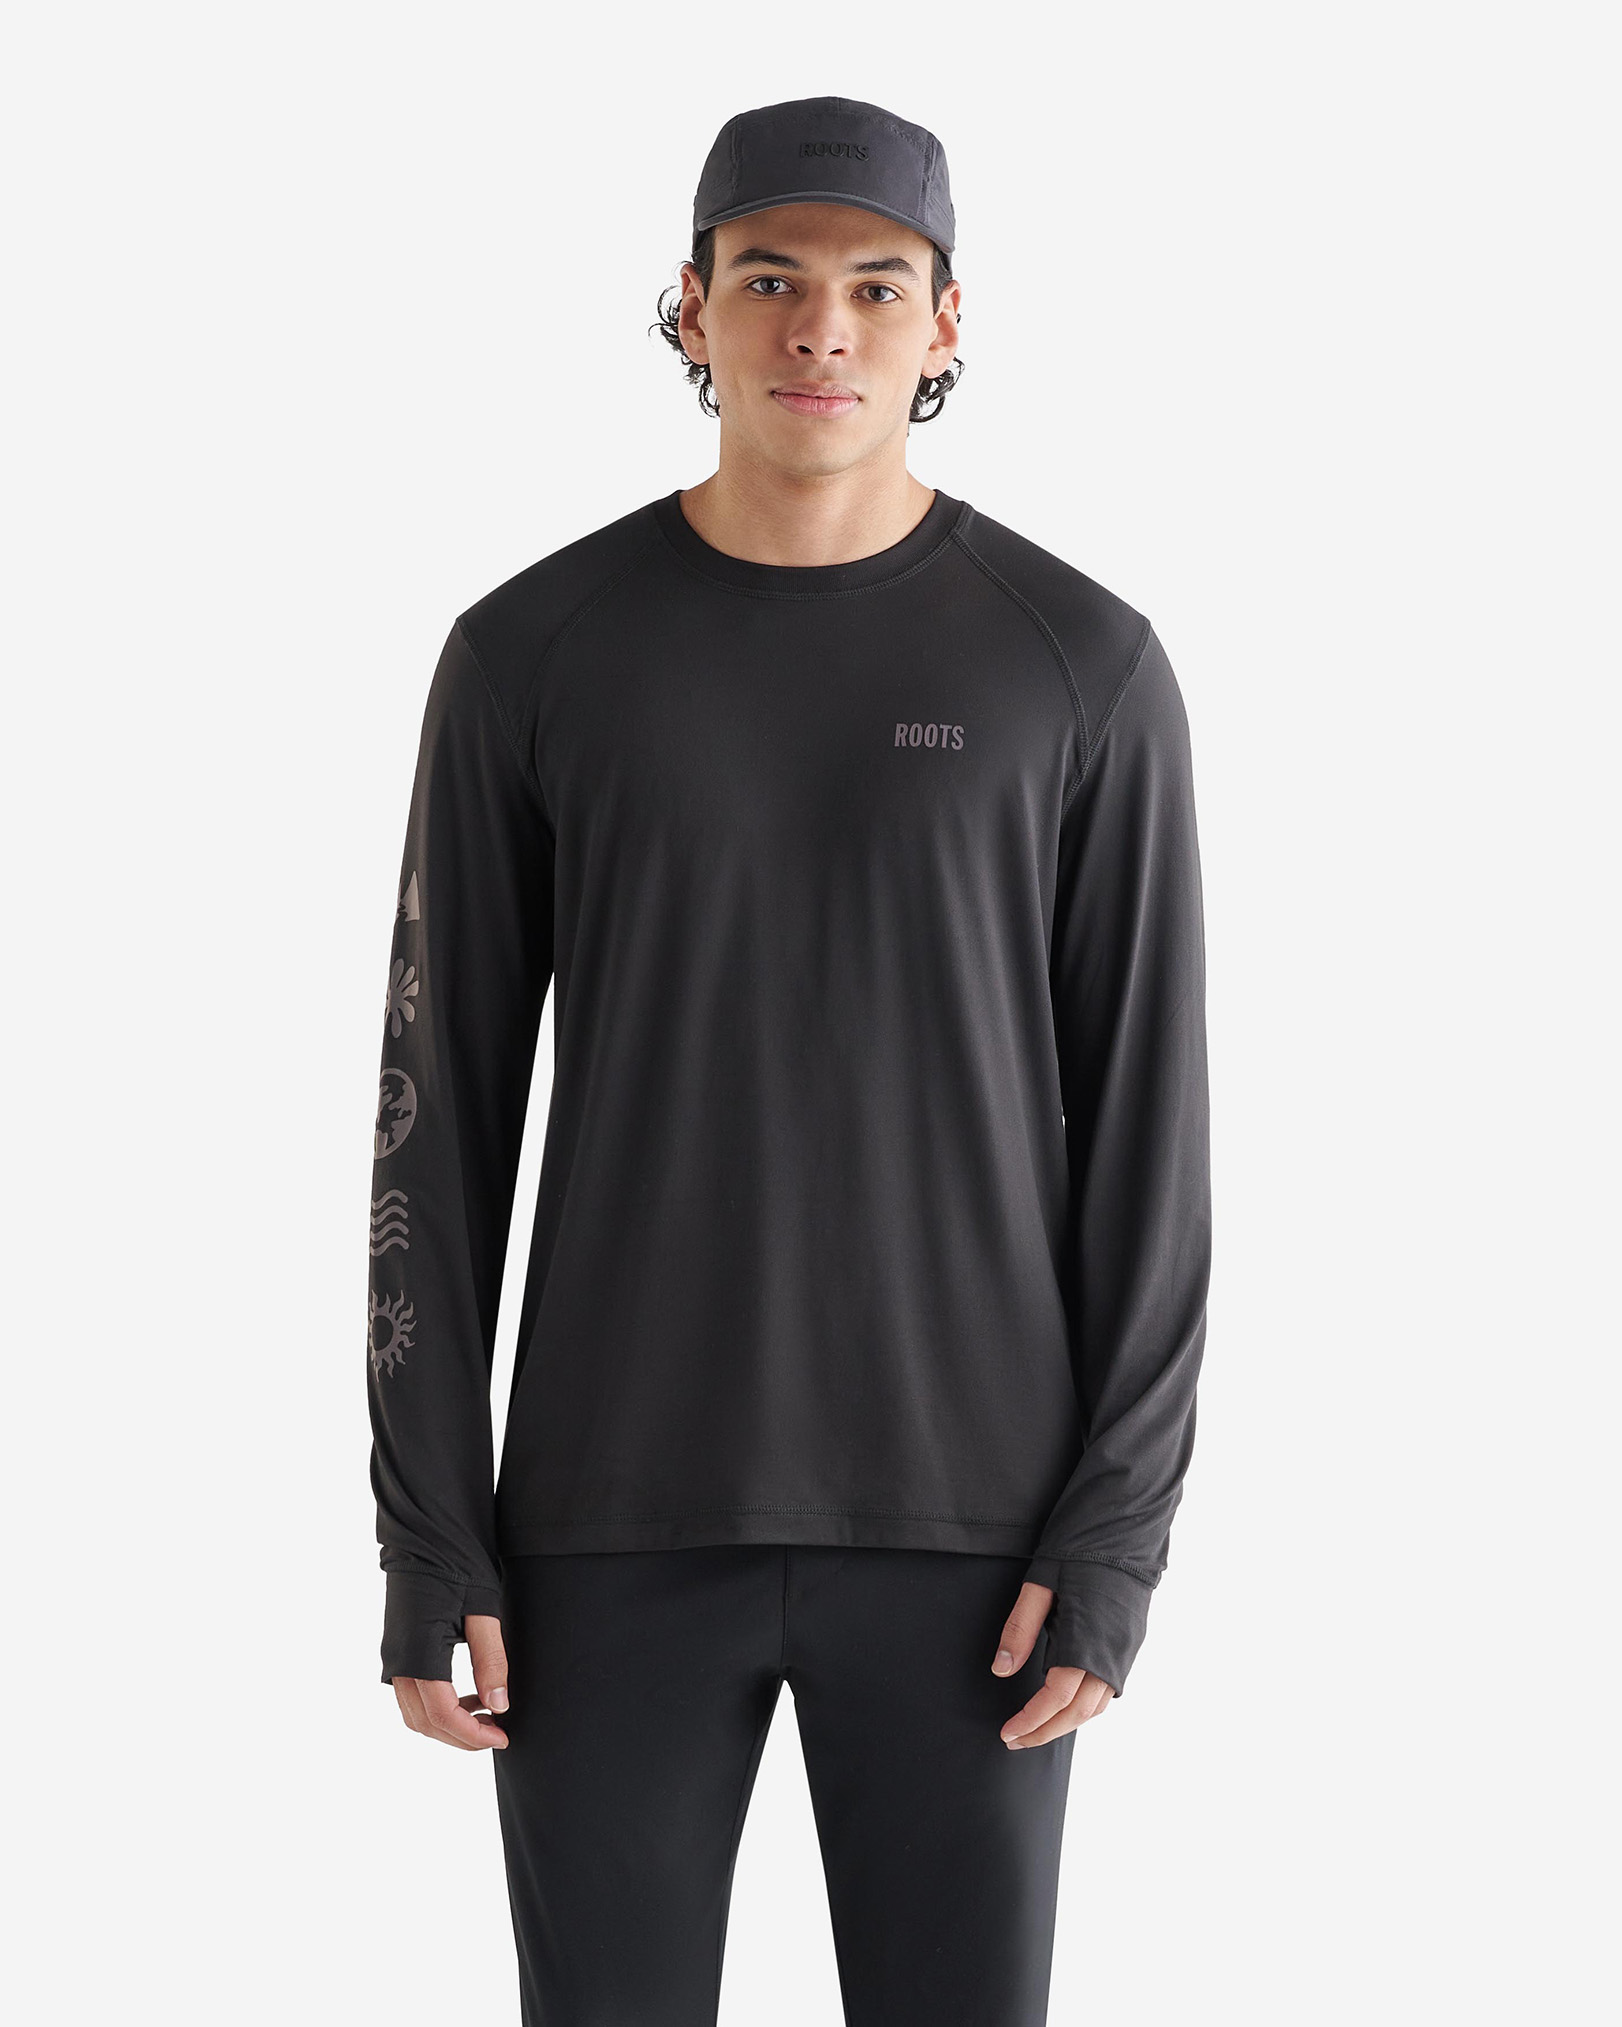 Roots Renew Graphic Long Sleeve T-Shirt in Black